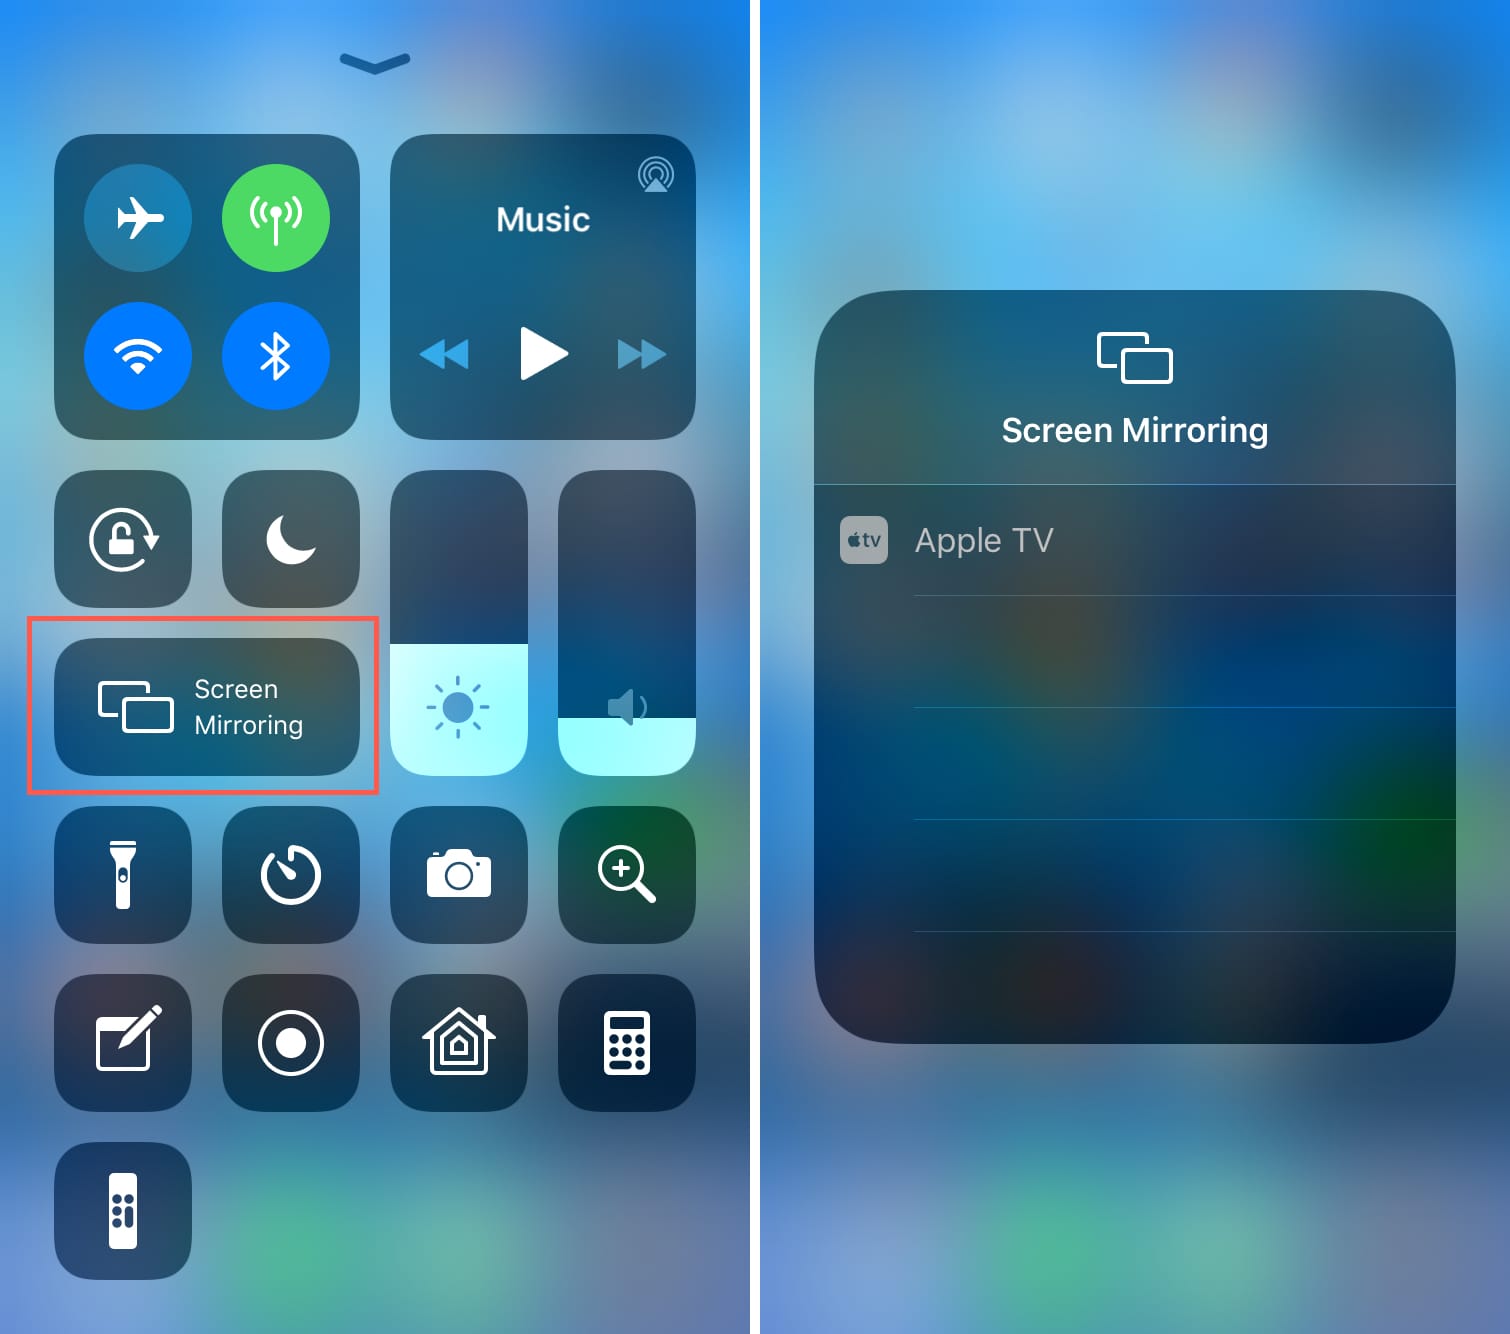 Iphone Or Ipad Display To Apple Tv, Mirror Your Iphone To Apple Tv